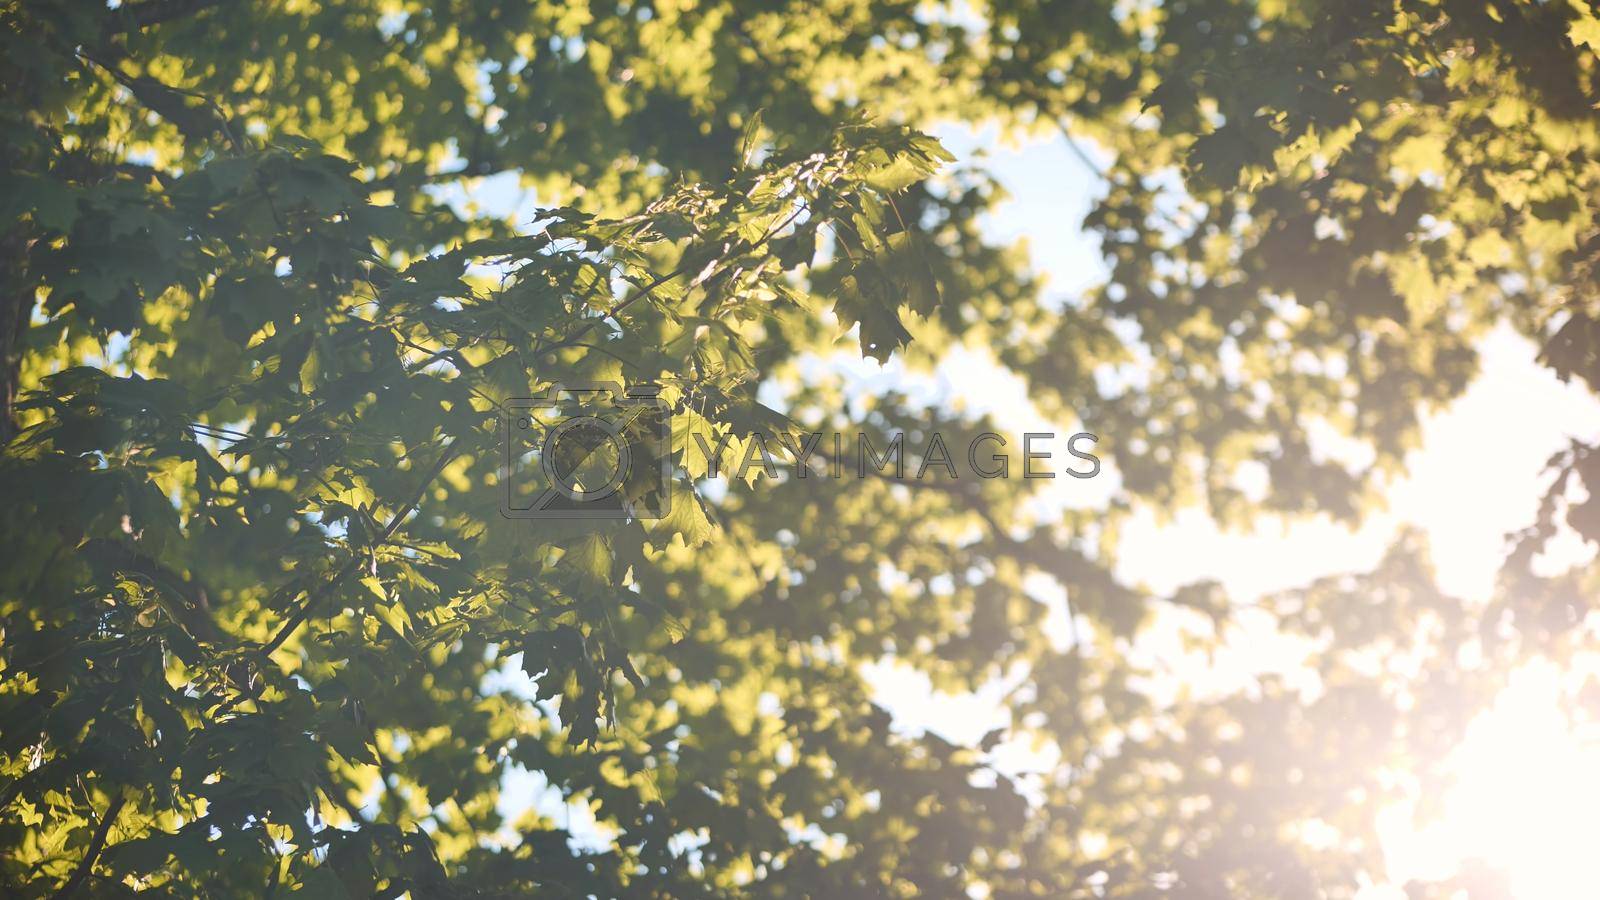 Royalty free image of The branches of a maple tree on a warm summer day in the sunlight. by DovidPro